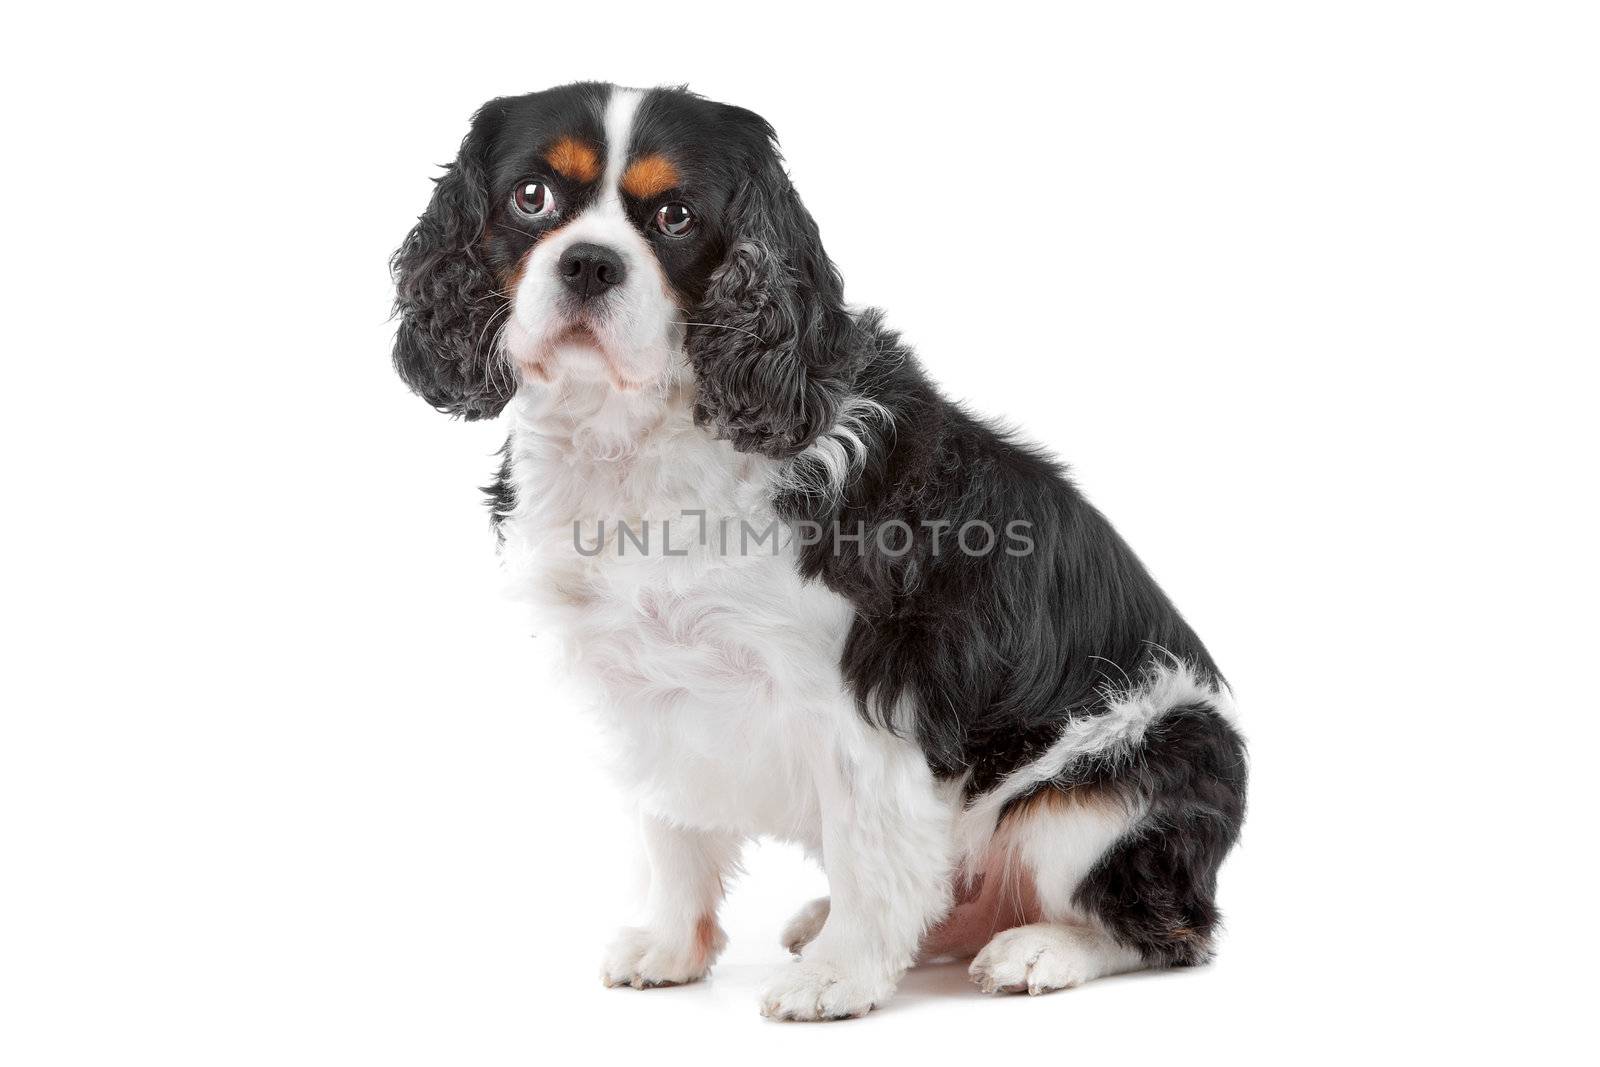 Cute Cavalier King Charles Spaniel dog sitting and looking at camera, on a white background